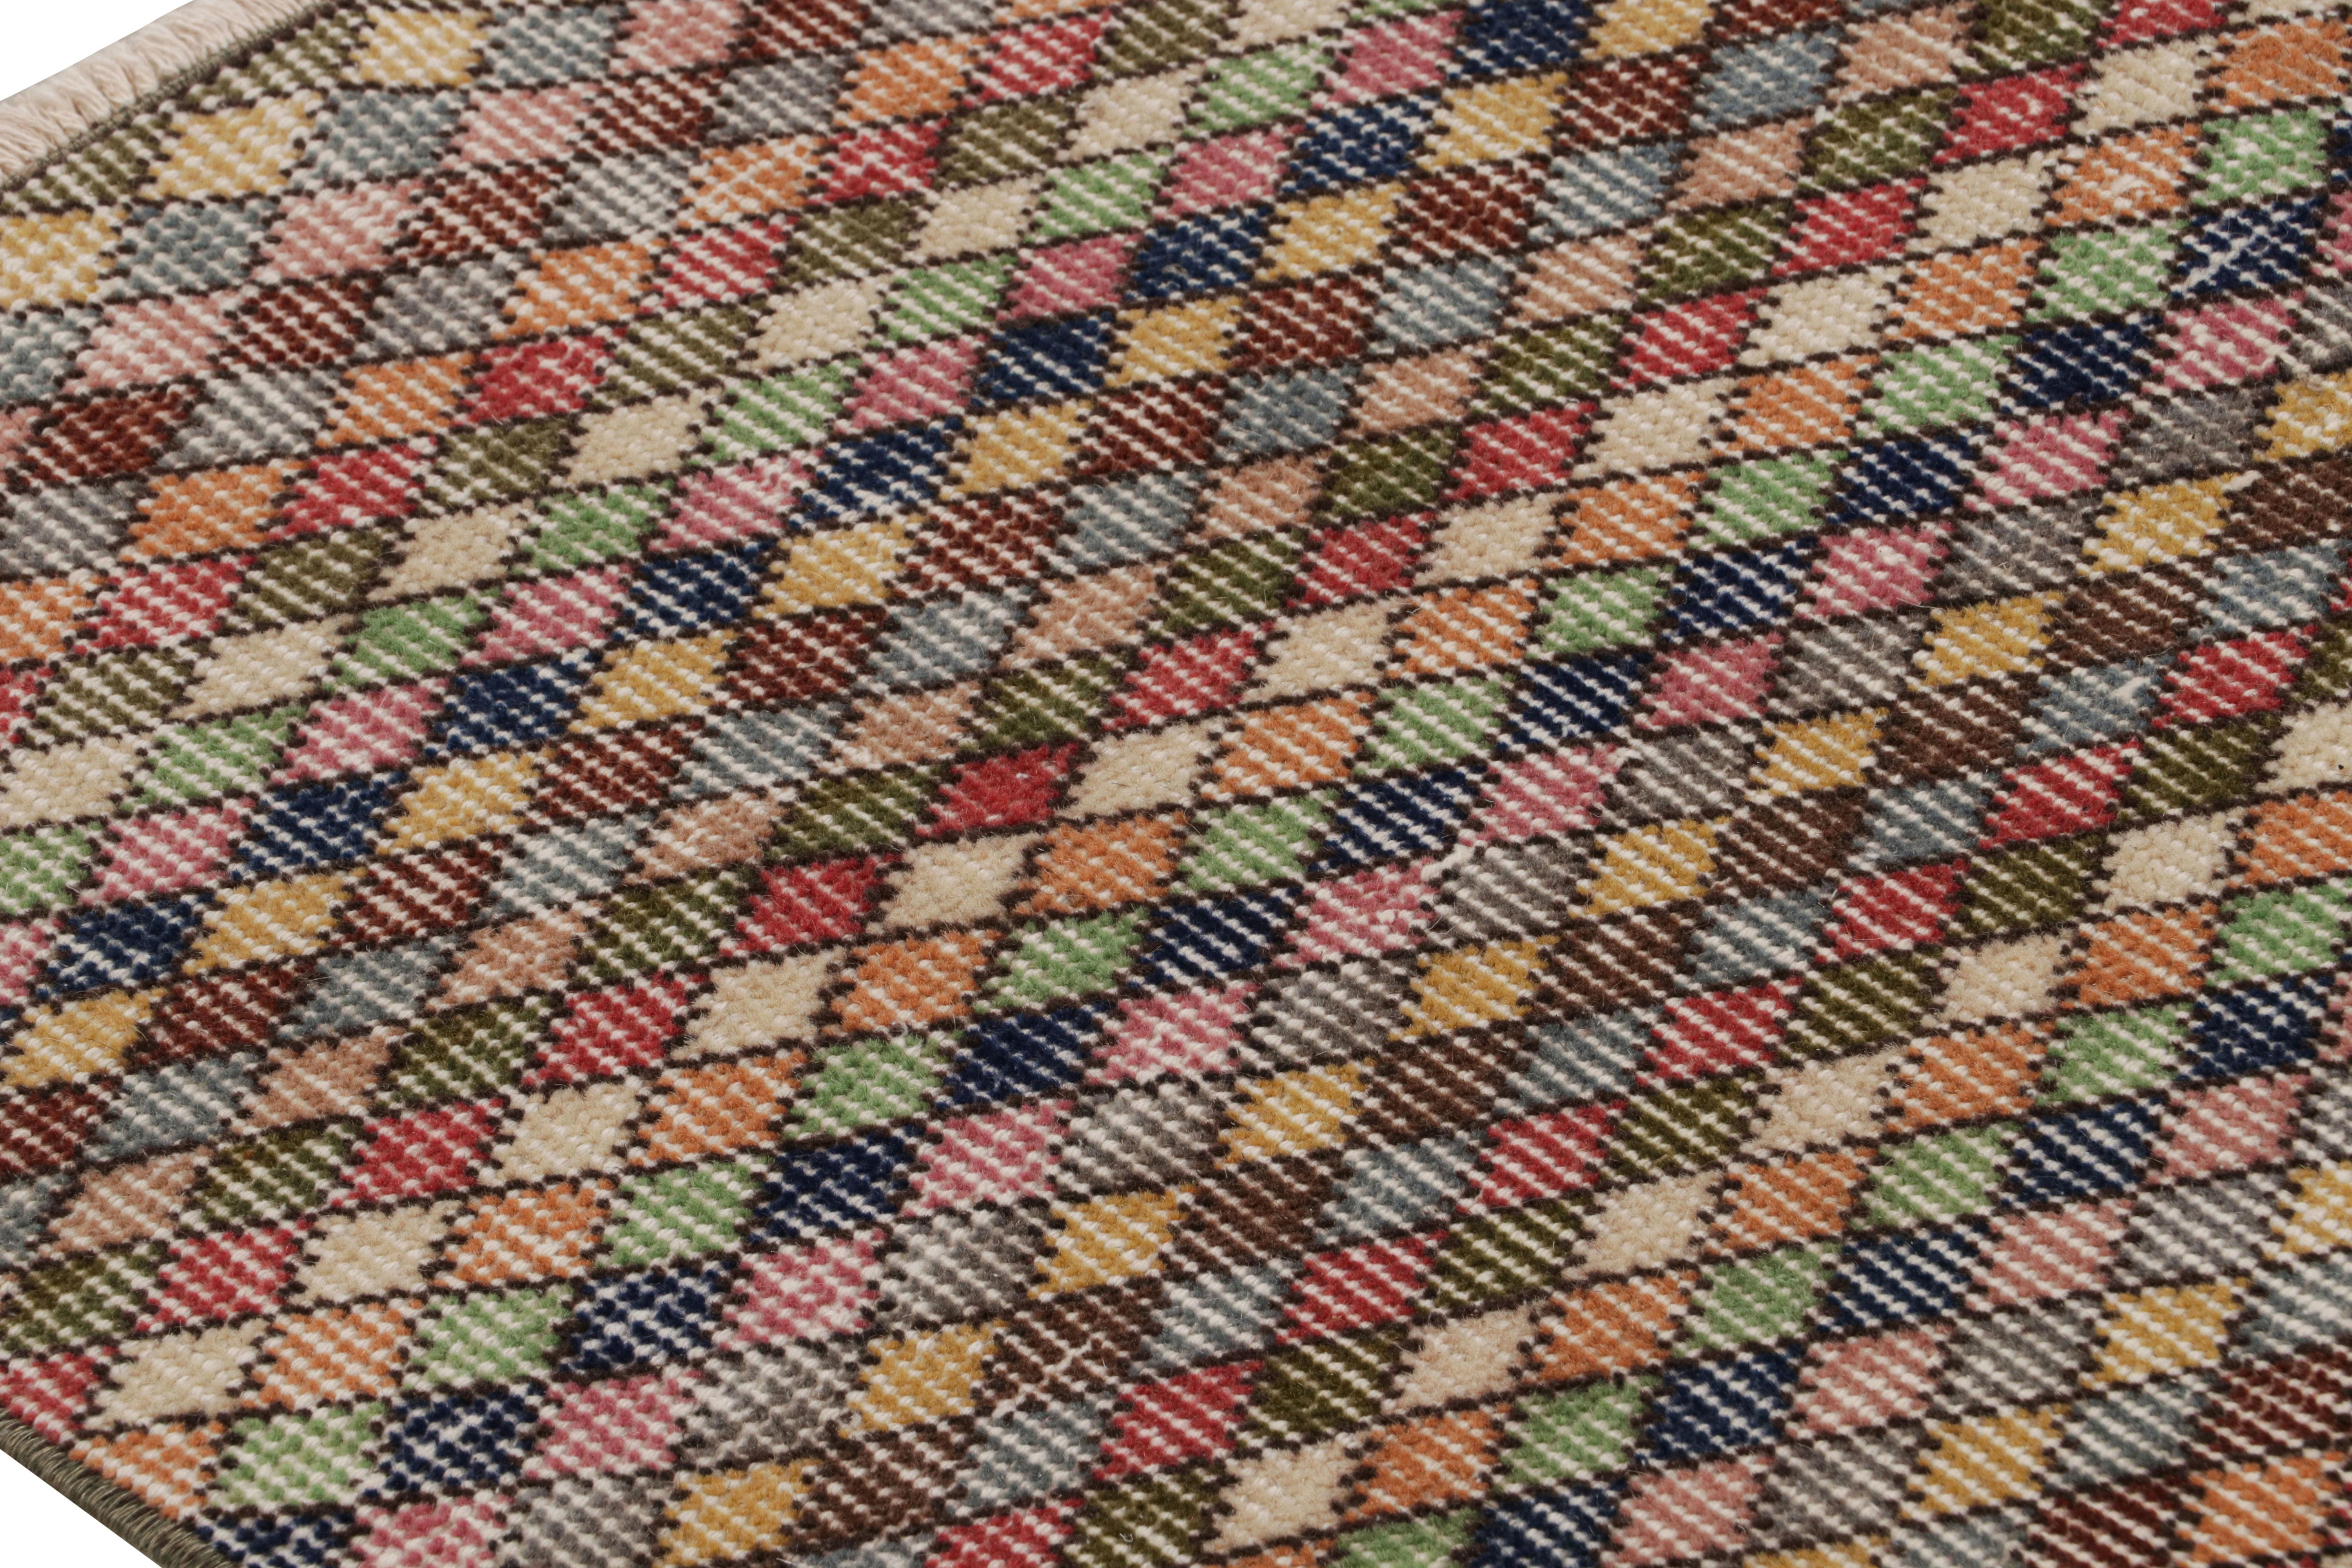 Vintage Zeki Müren Runner Rug with Colorful Geometric Pattern, from Rug & Kilim In Good Condition For Sale In Long Island City, NY